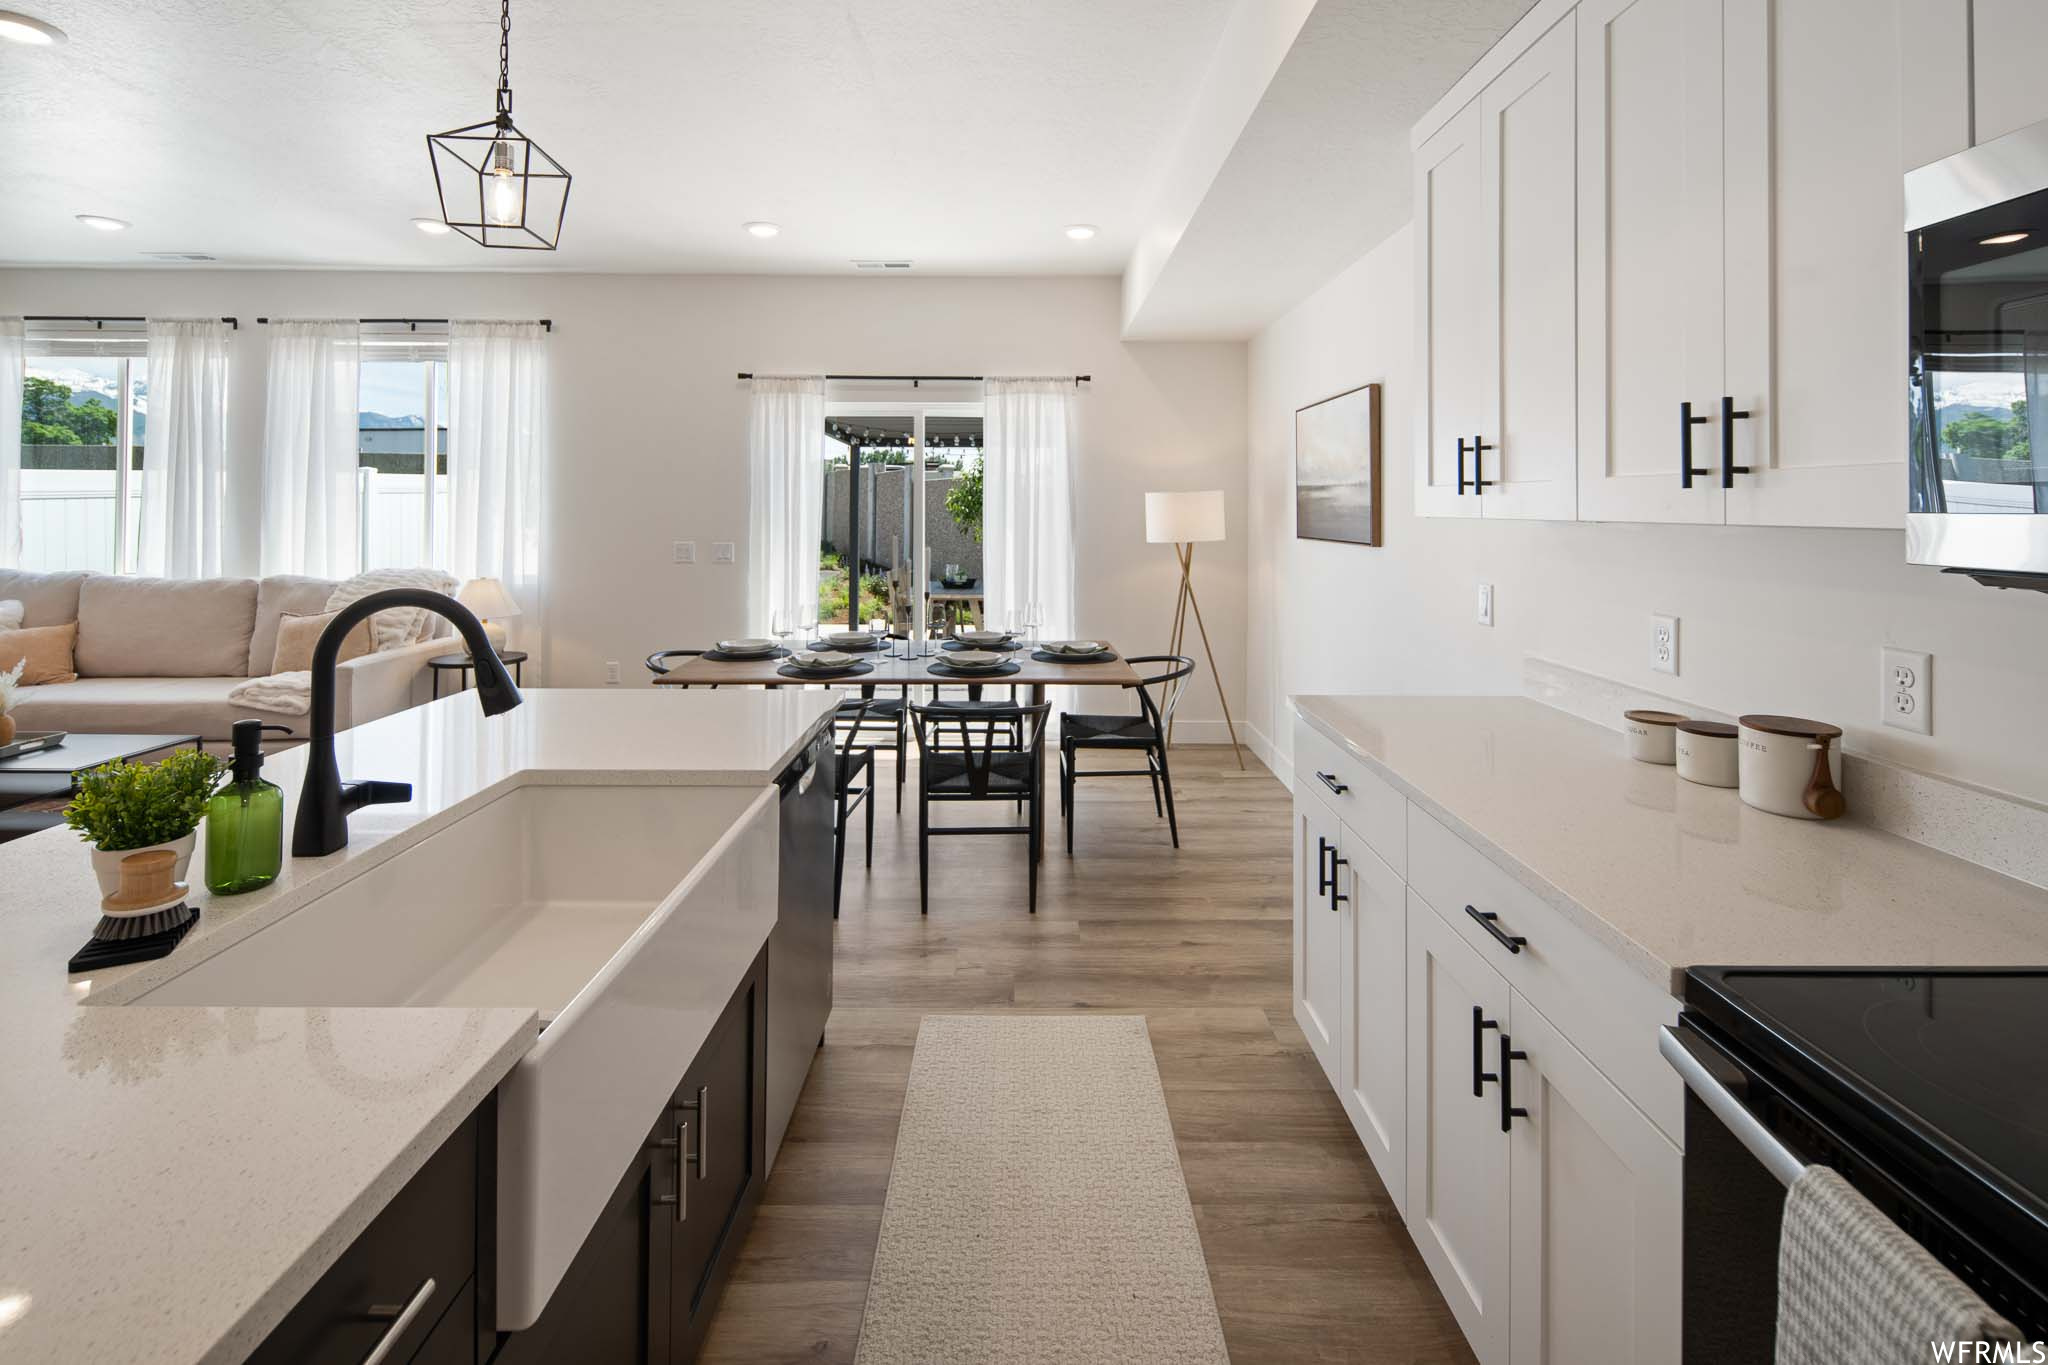 Kitchen featuring a wealth of natural light, white cabinets, light hardwood floors, and hanging light fixtures